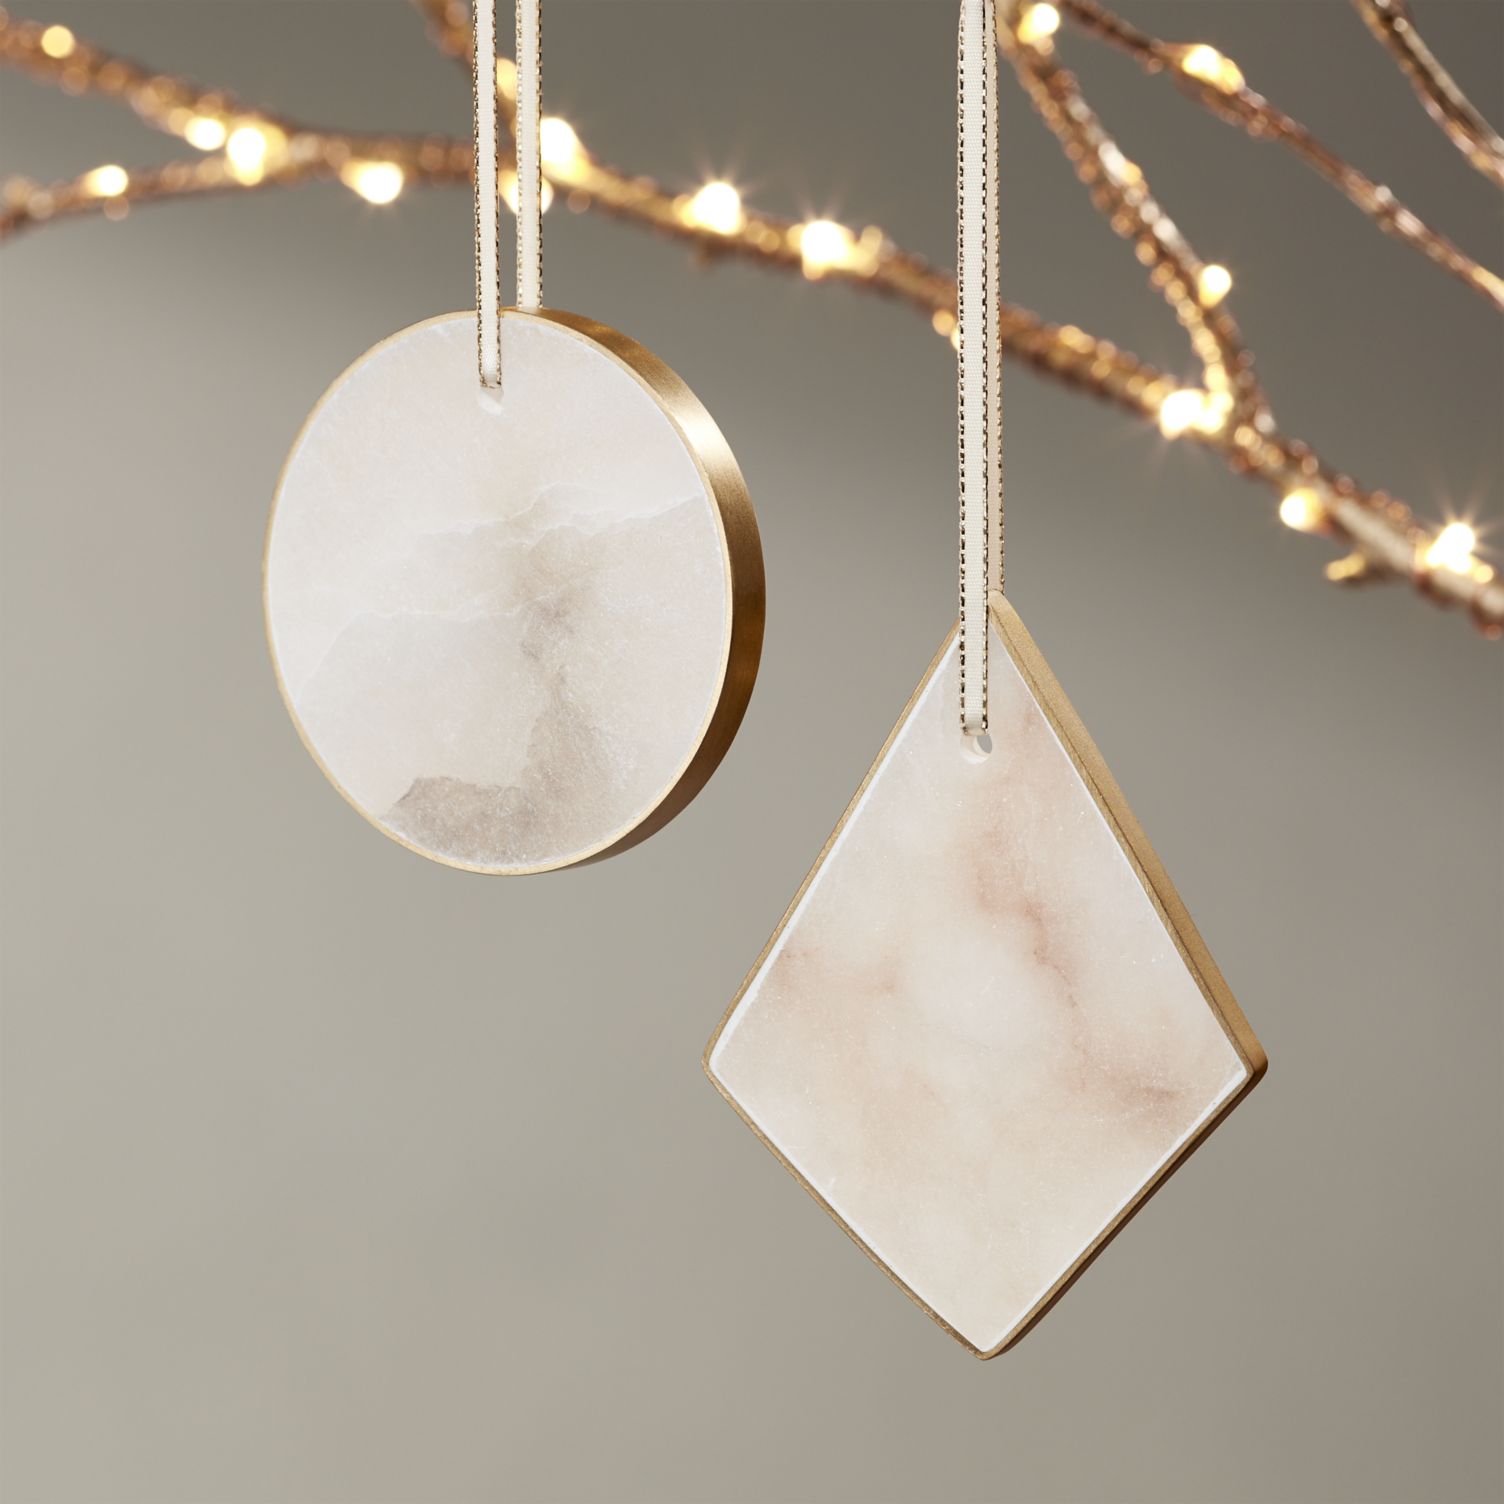 Alabaster ornaments from CB2